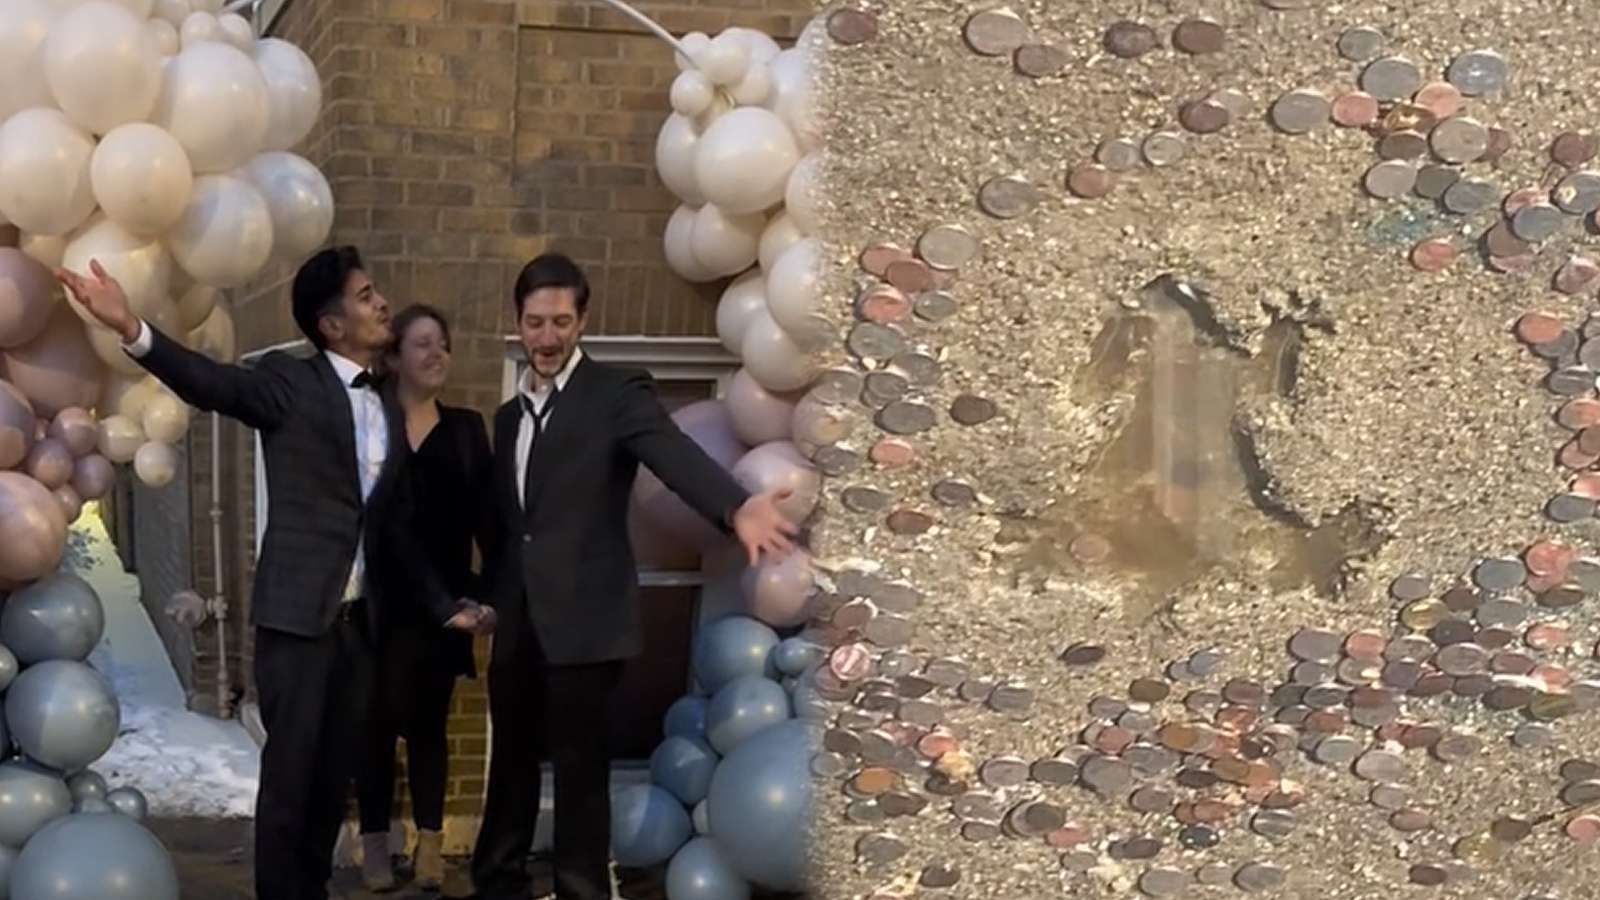 Chicago's viral 'rat hole' inspires unity as couple weds at iconic location